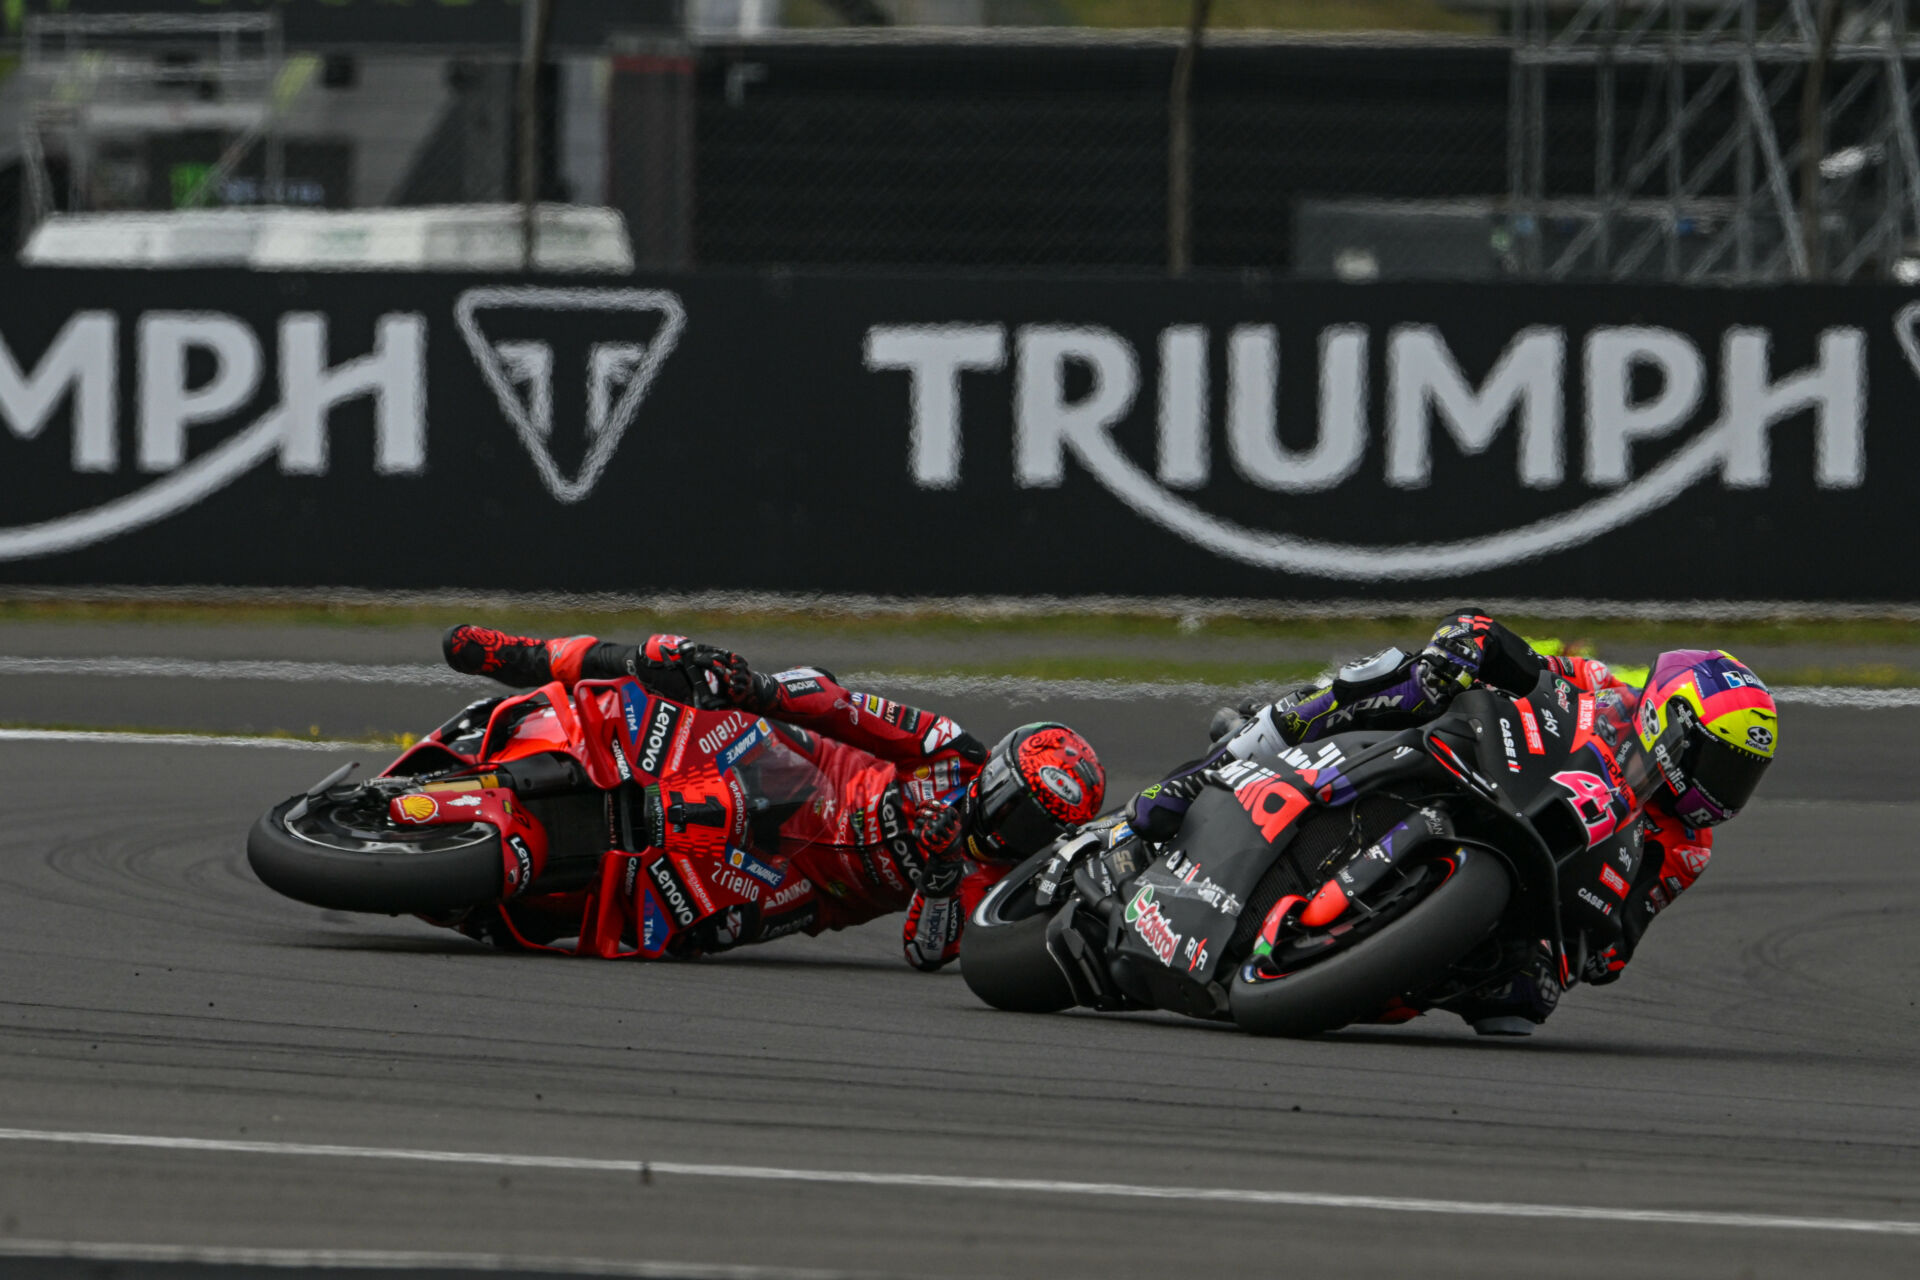 Francesco Bagnaia (1) crashed out while running fourth in the Sprint Race. Photo courtesy Dorna.